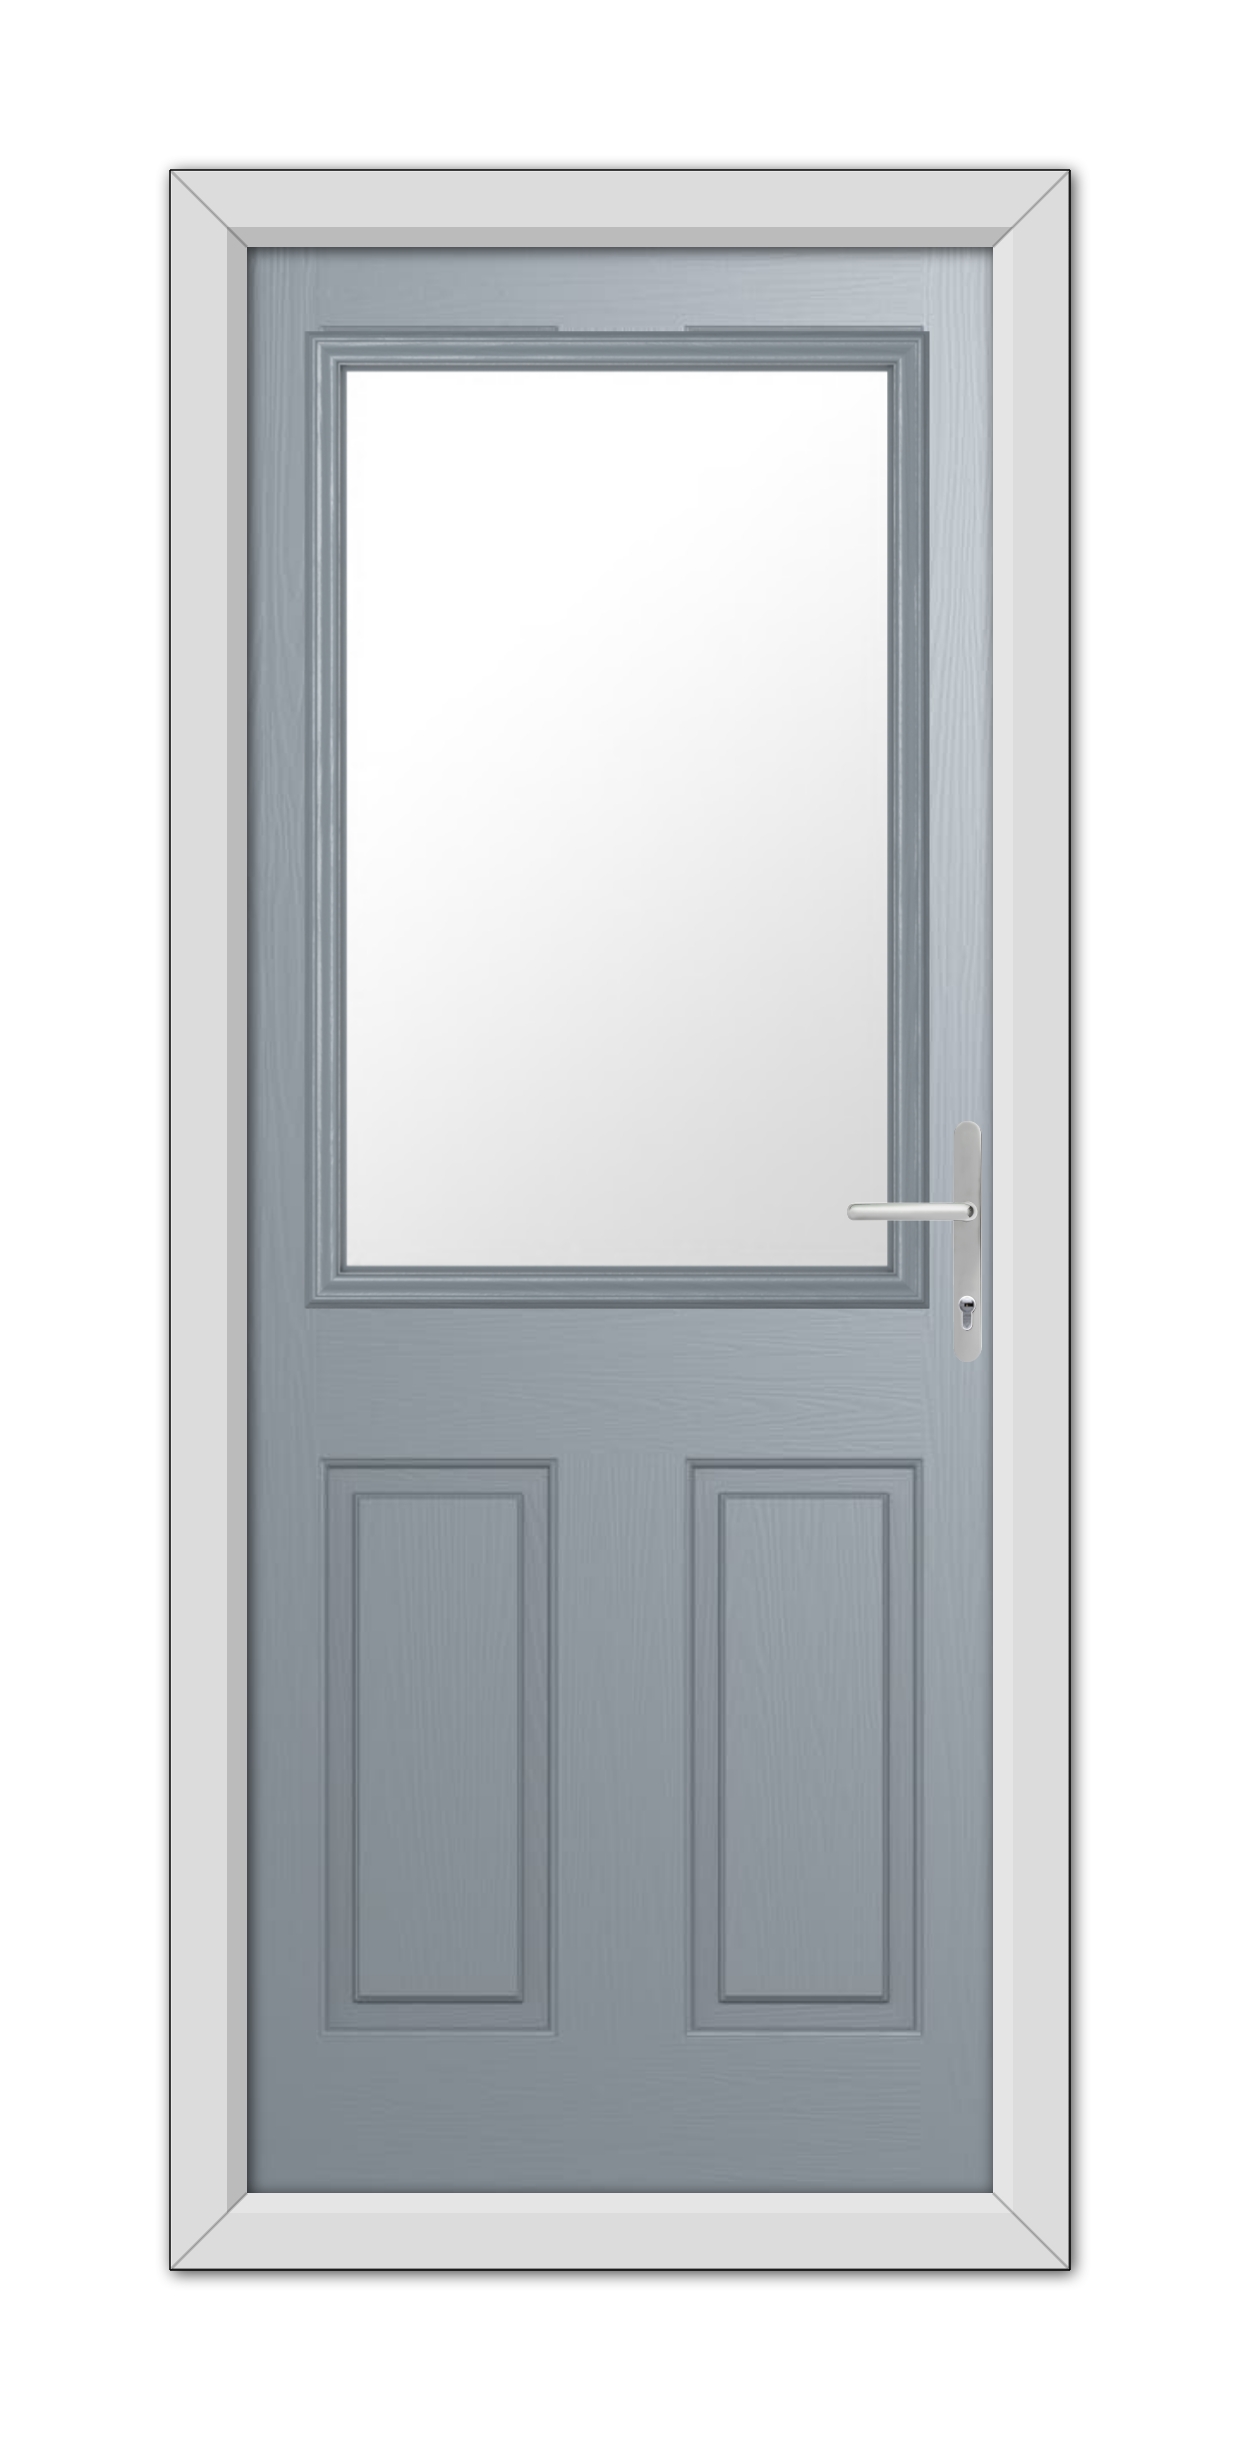 A modern French Grey Buxton Composite Door 48mm Timber Core with a rectangular window and a silver handle, set within a white frame.